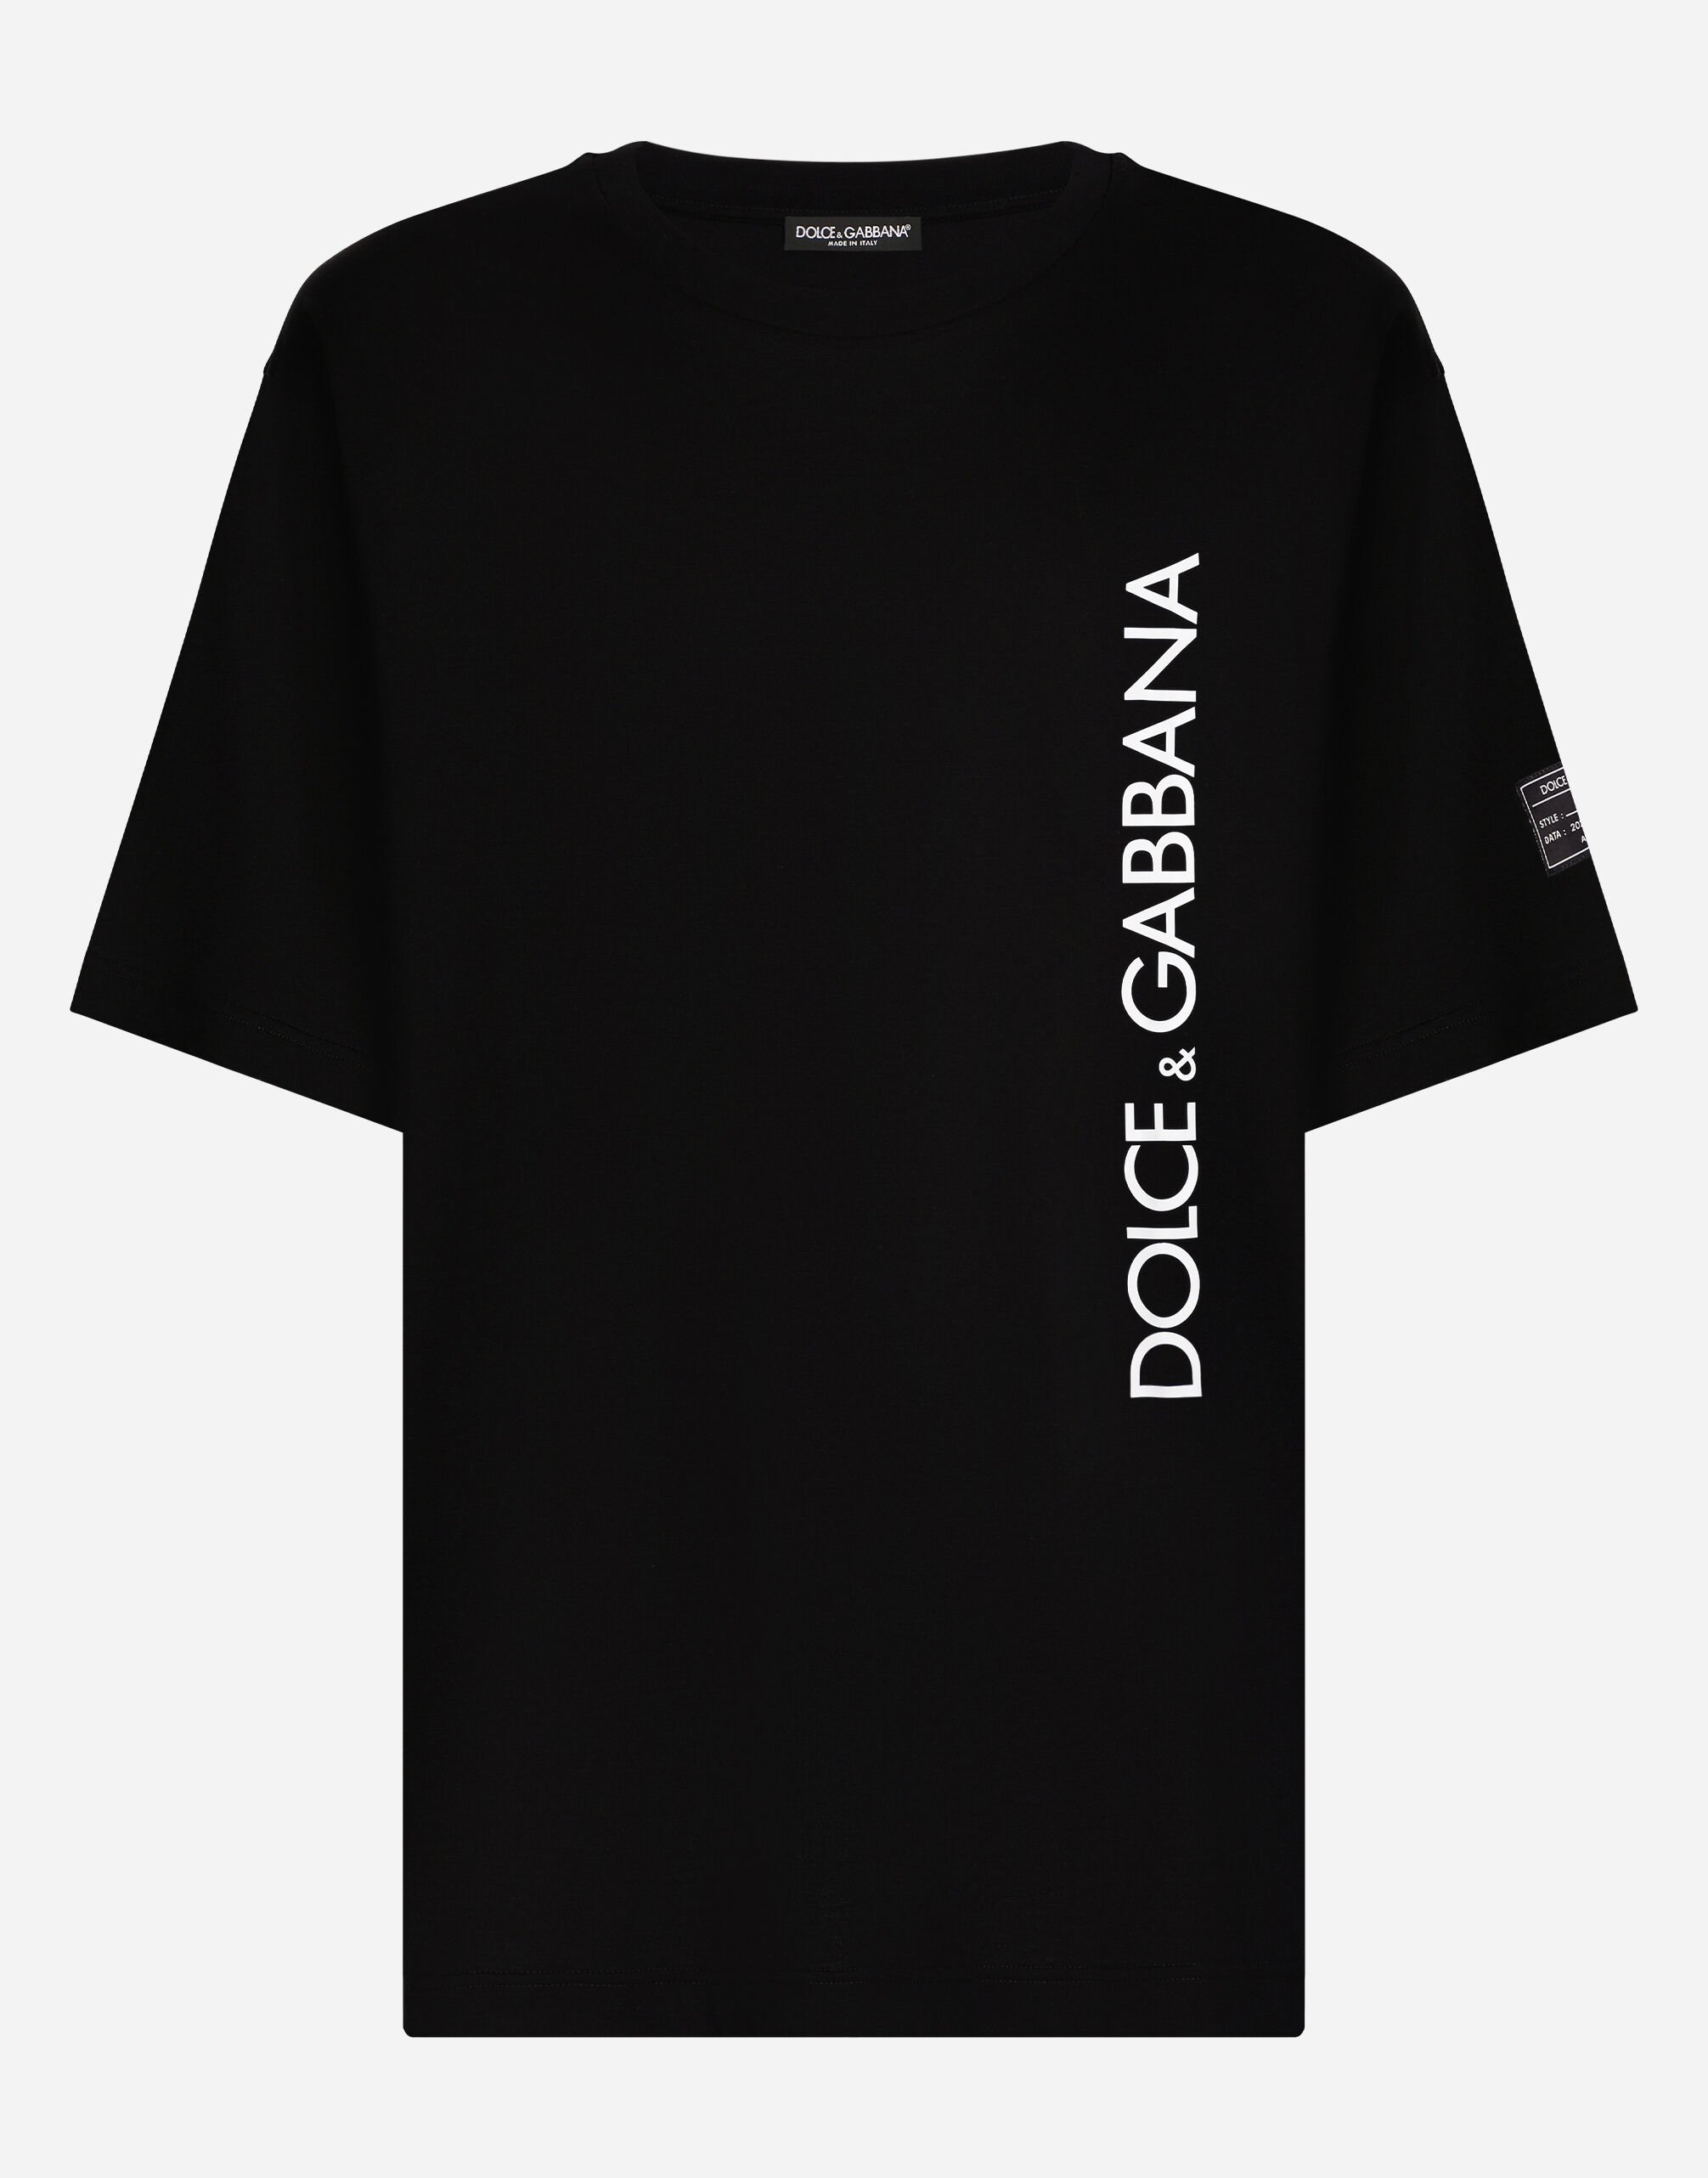 Dolce & Gabbana Short-sleeved T-shirt with vertical logo print Black G2PS2THJMOW